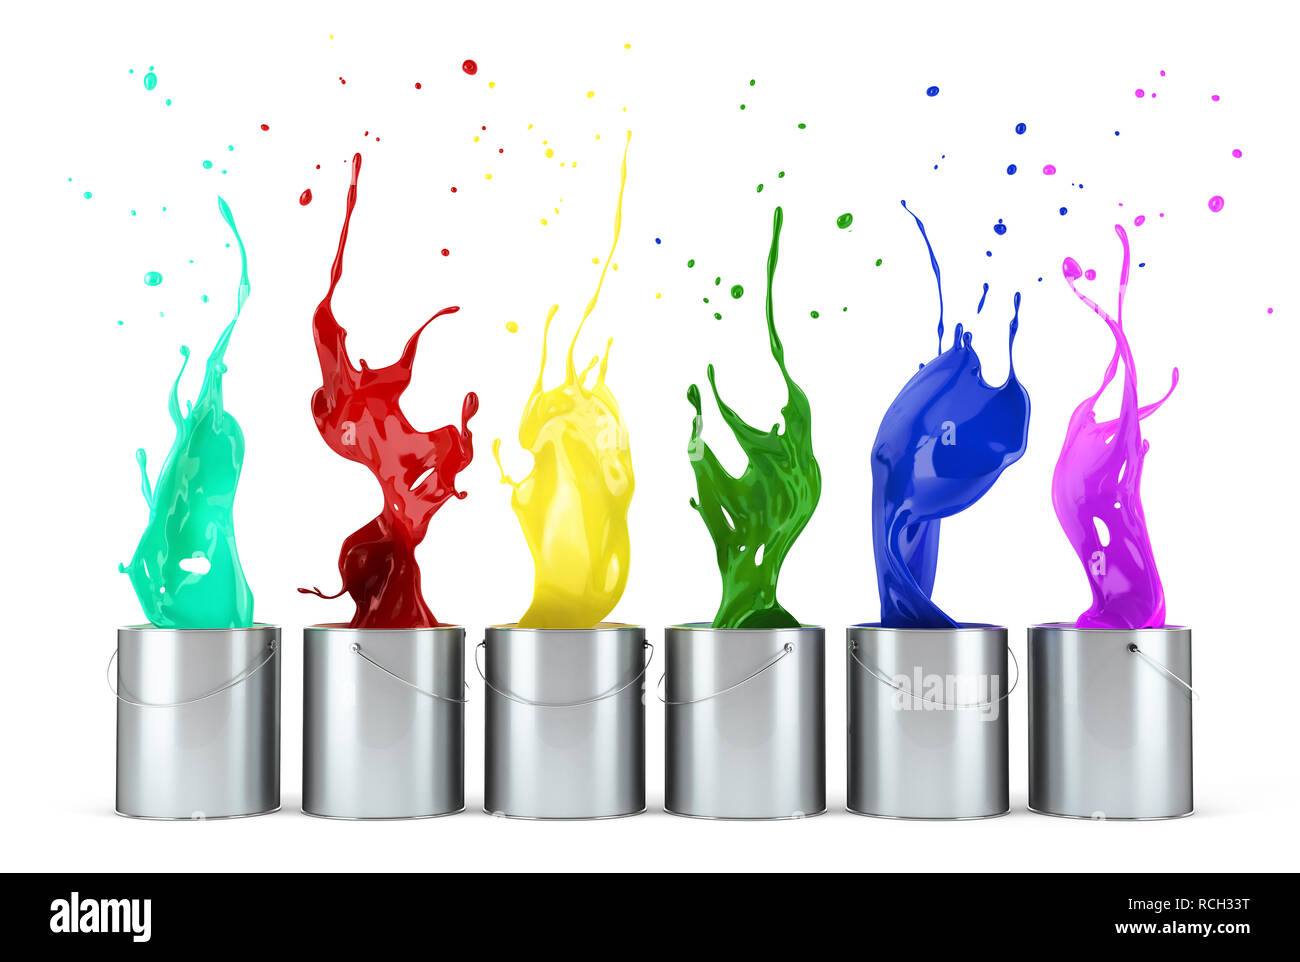 turquoise, red, yellow, green, blue, pink paints splashing out from metallic silver buckets in line. On white background. Stock Photo